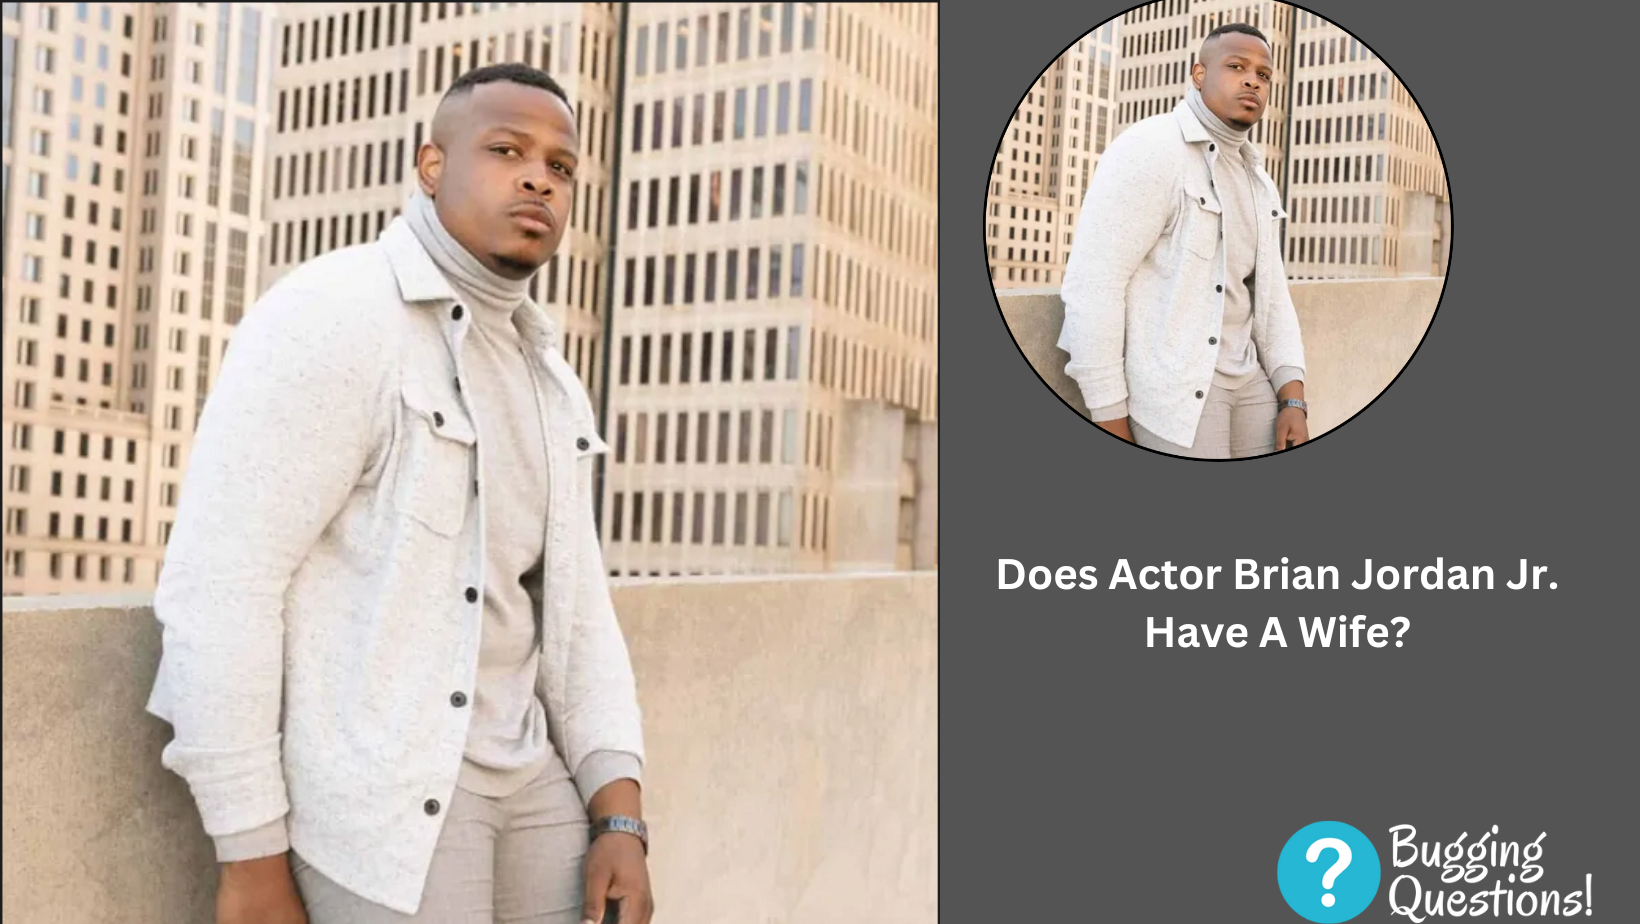 Does Actor Brian Jordan Jr. Have A Wife?